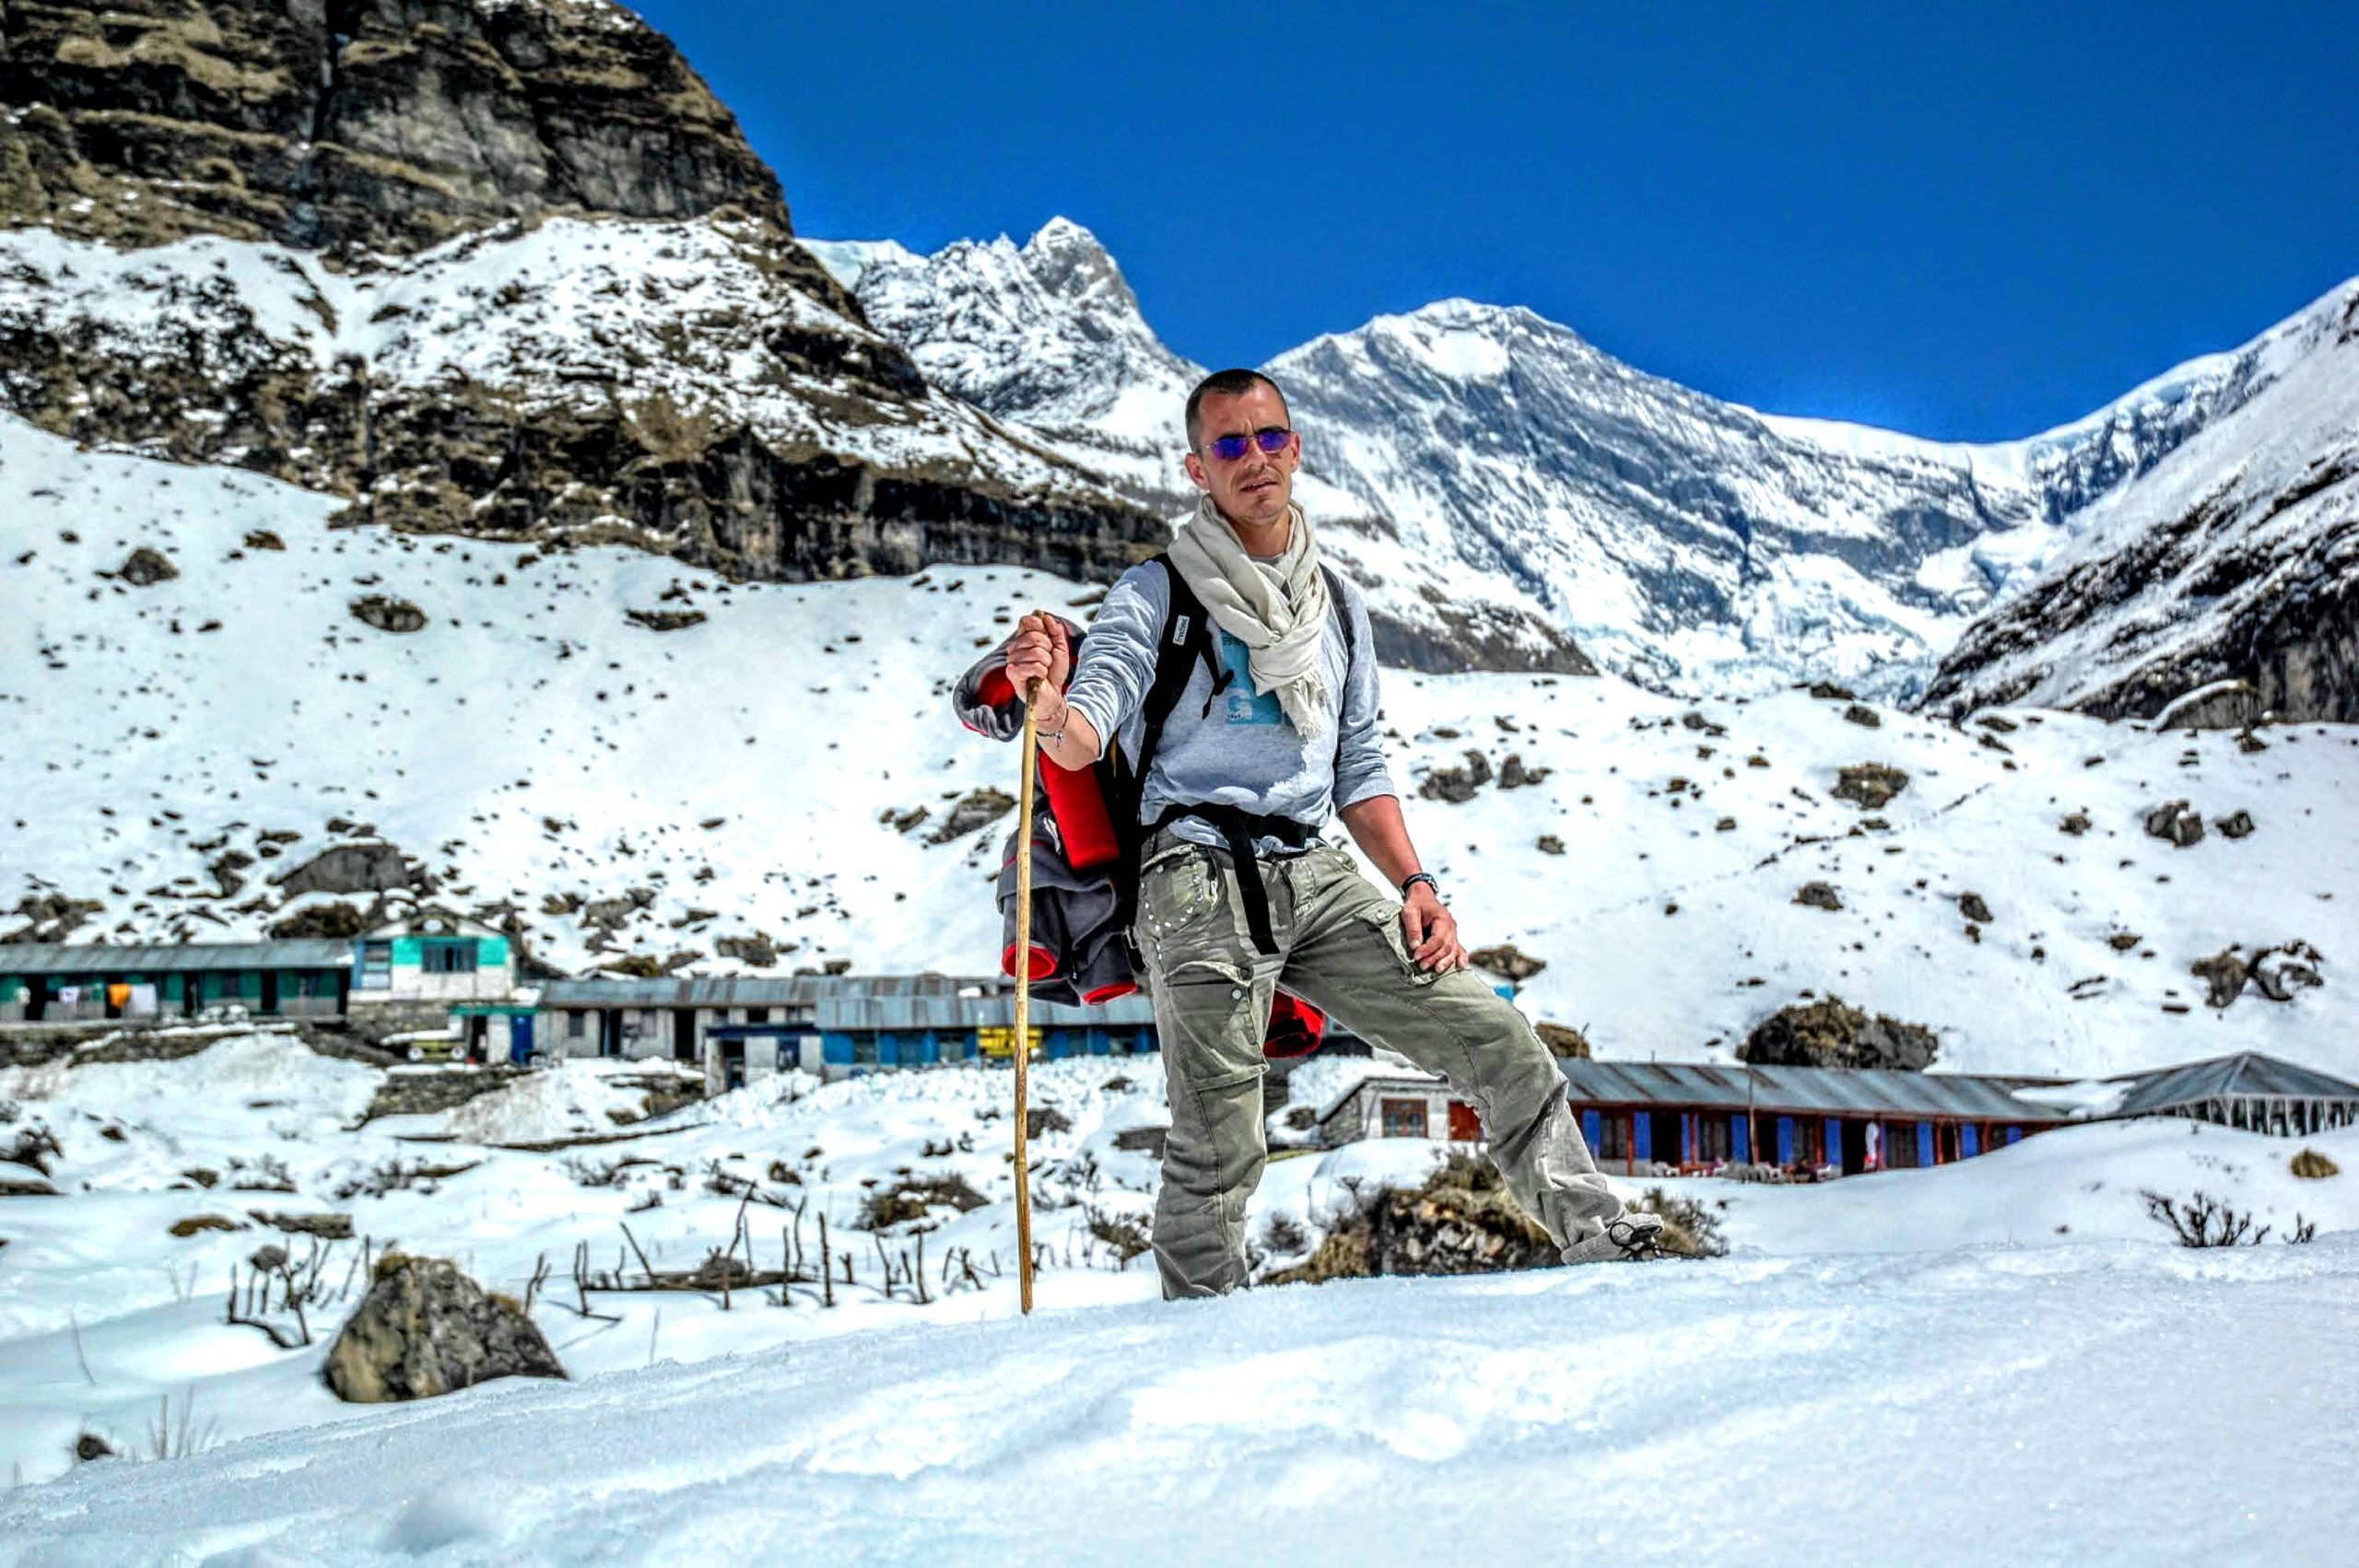 Image Annapurna Mountain with a man standing in between the image,stading with the help of stick in his hand. - Annapurna Base Camp Trek | Hiking Himalayas Treks & Expedition